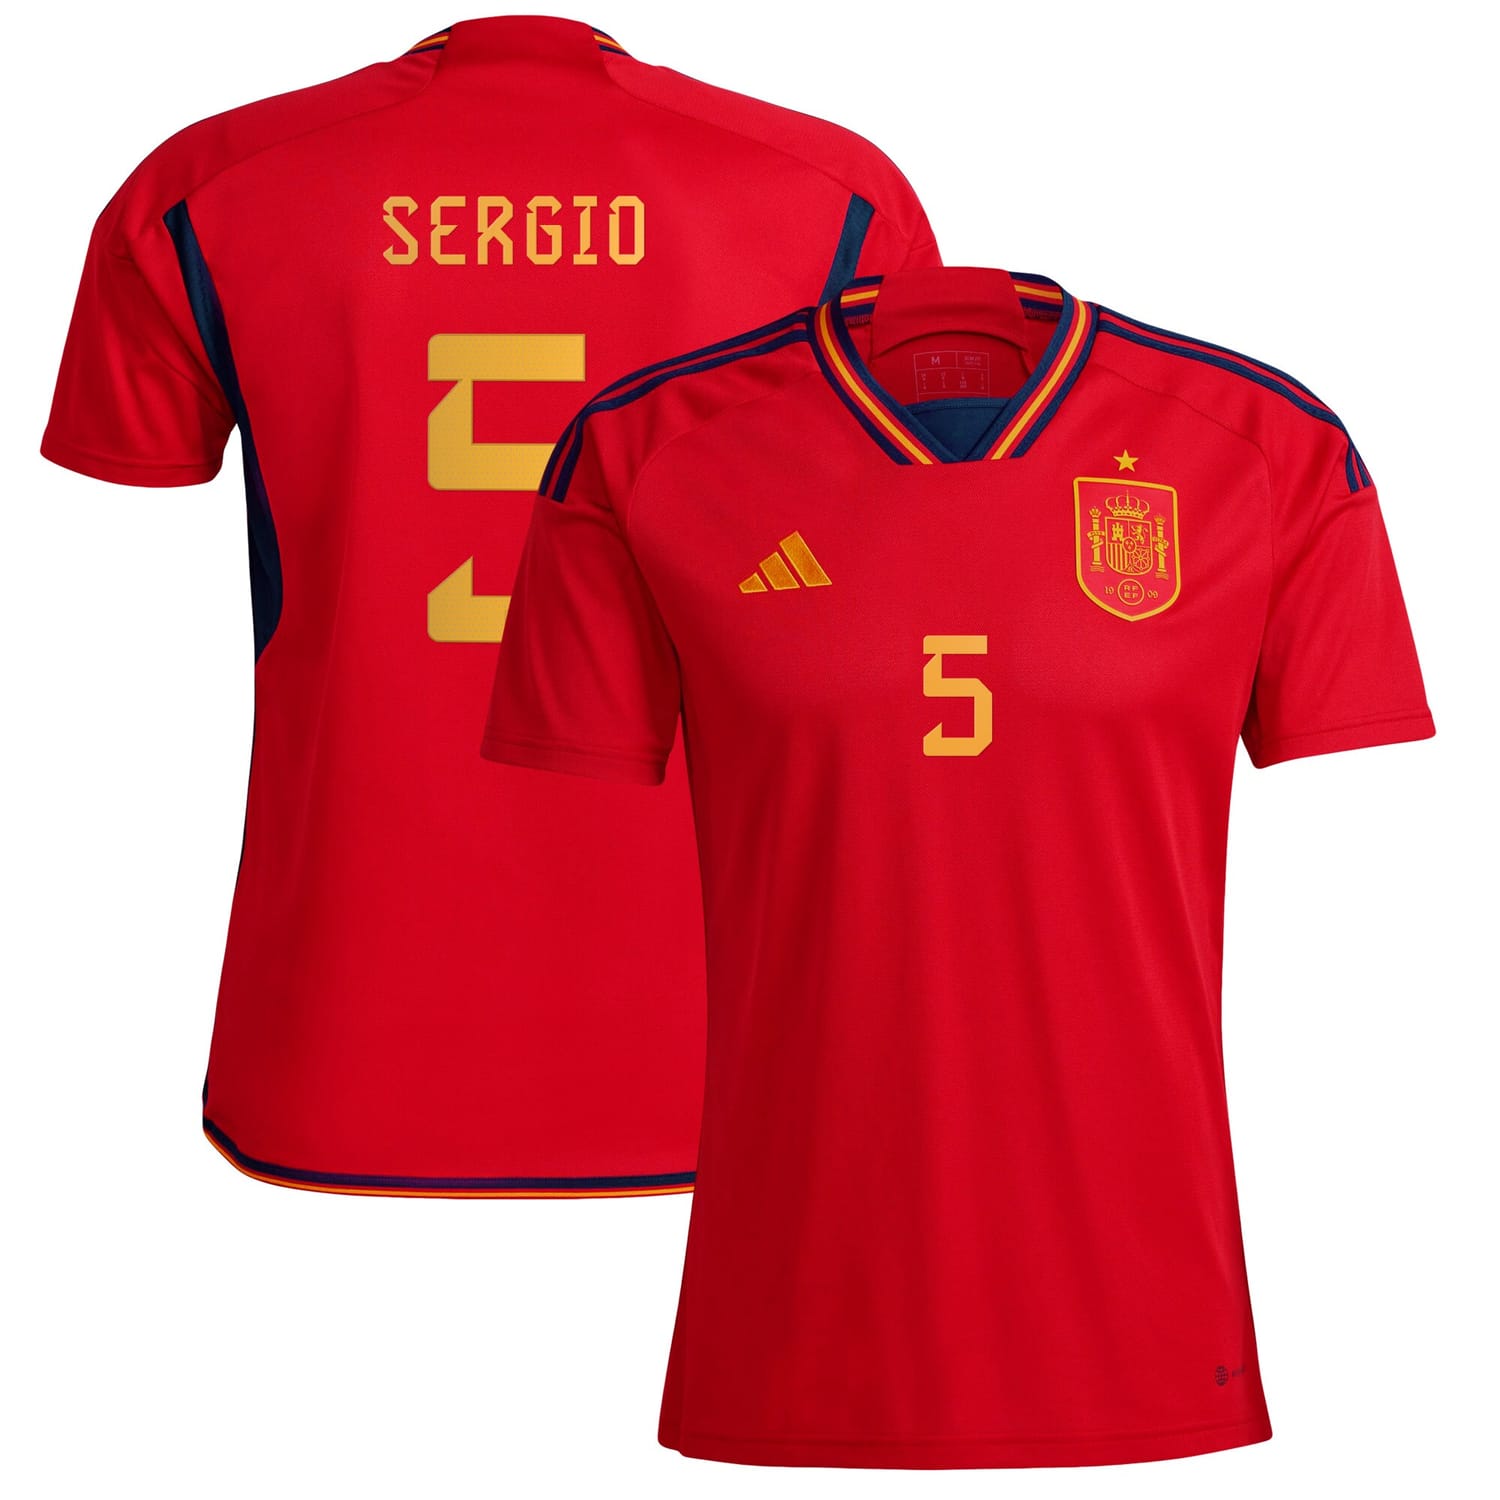 Spain National Team Home Jersey Shirt Red 2022-23 player Sergio Busquets printing for Men